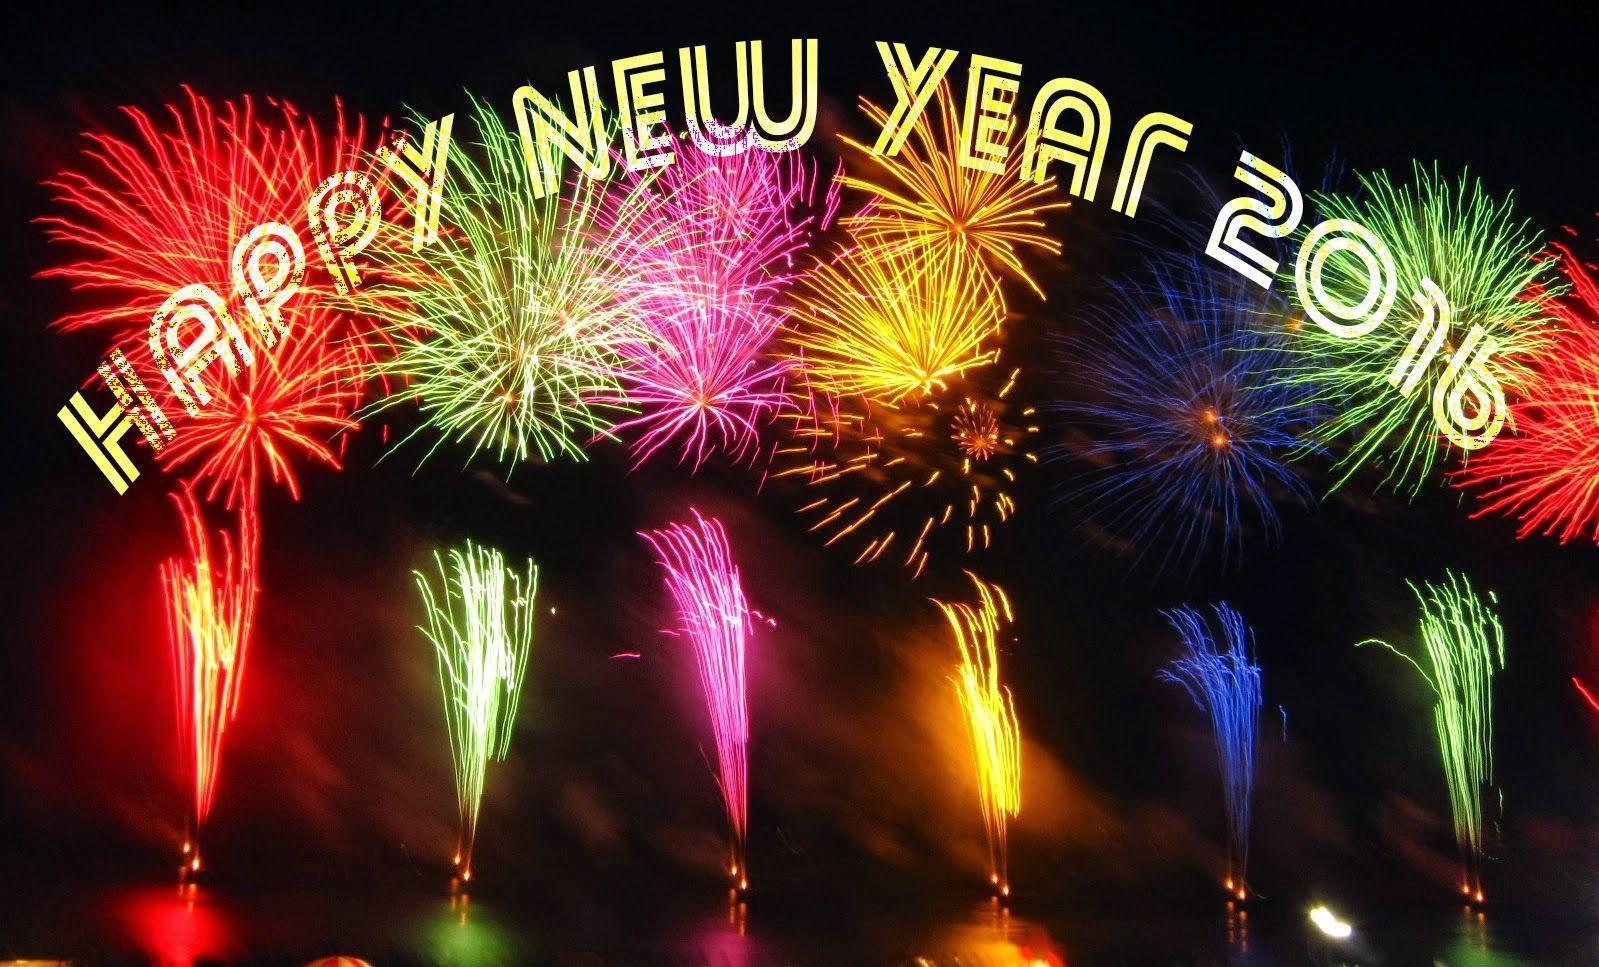 Happy New Year 2016 Pics, Wallpaper, Image Free Download